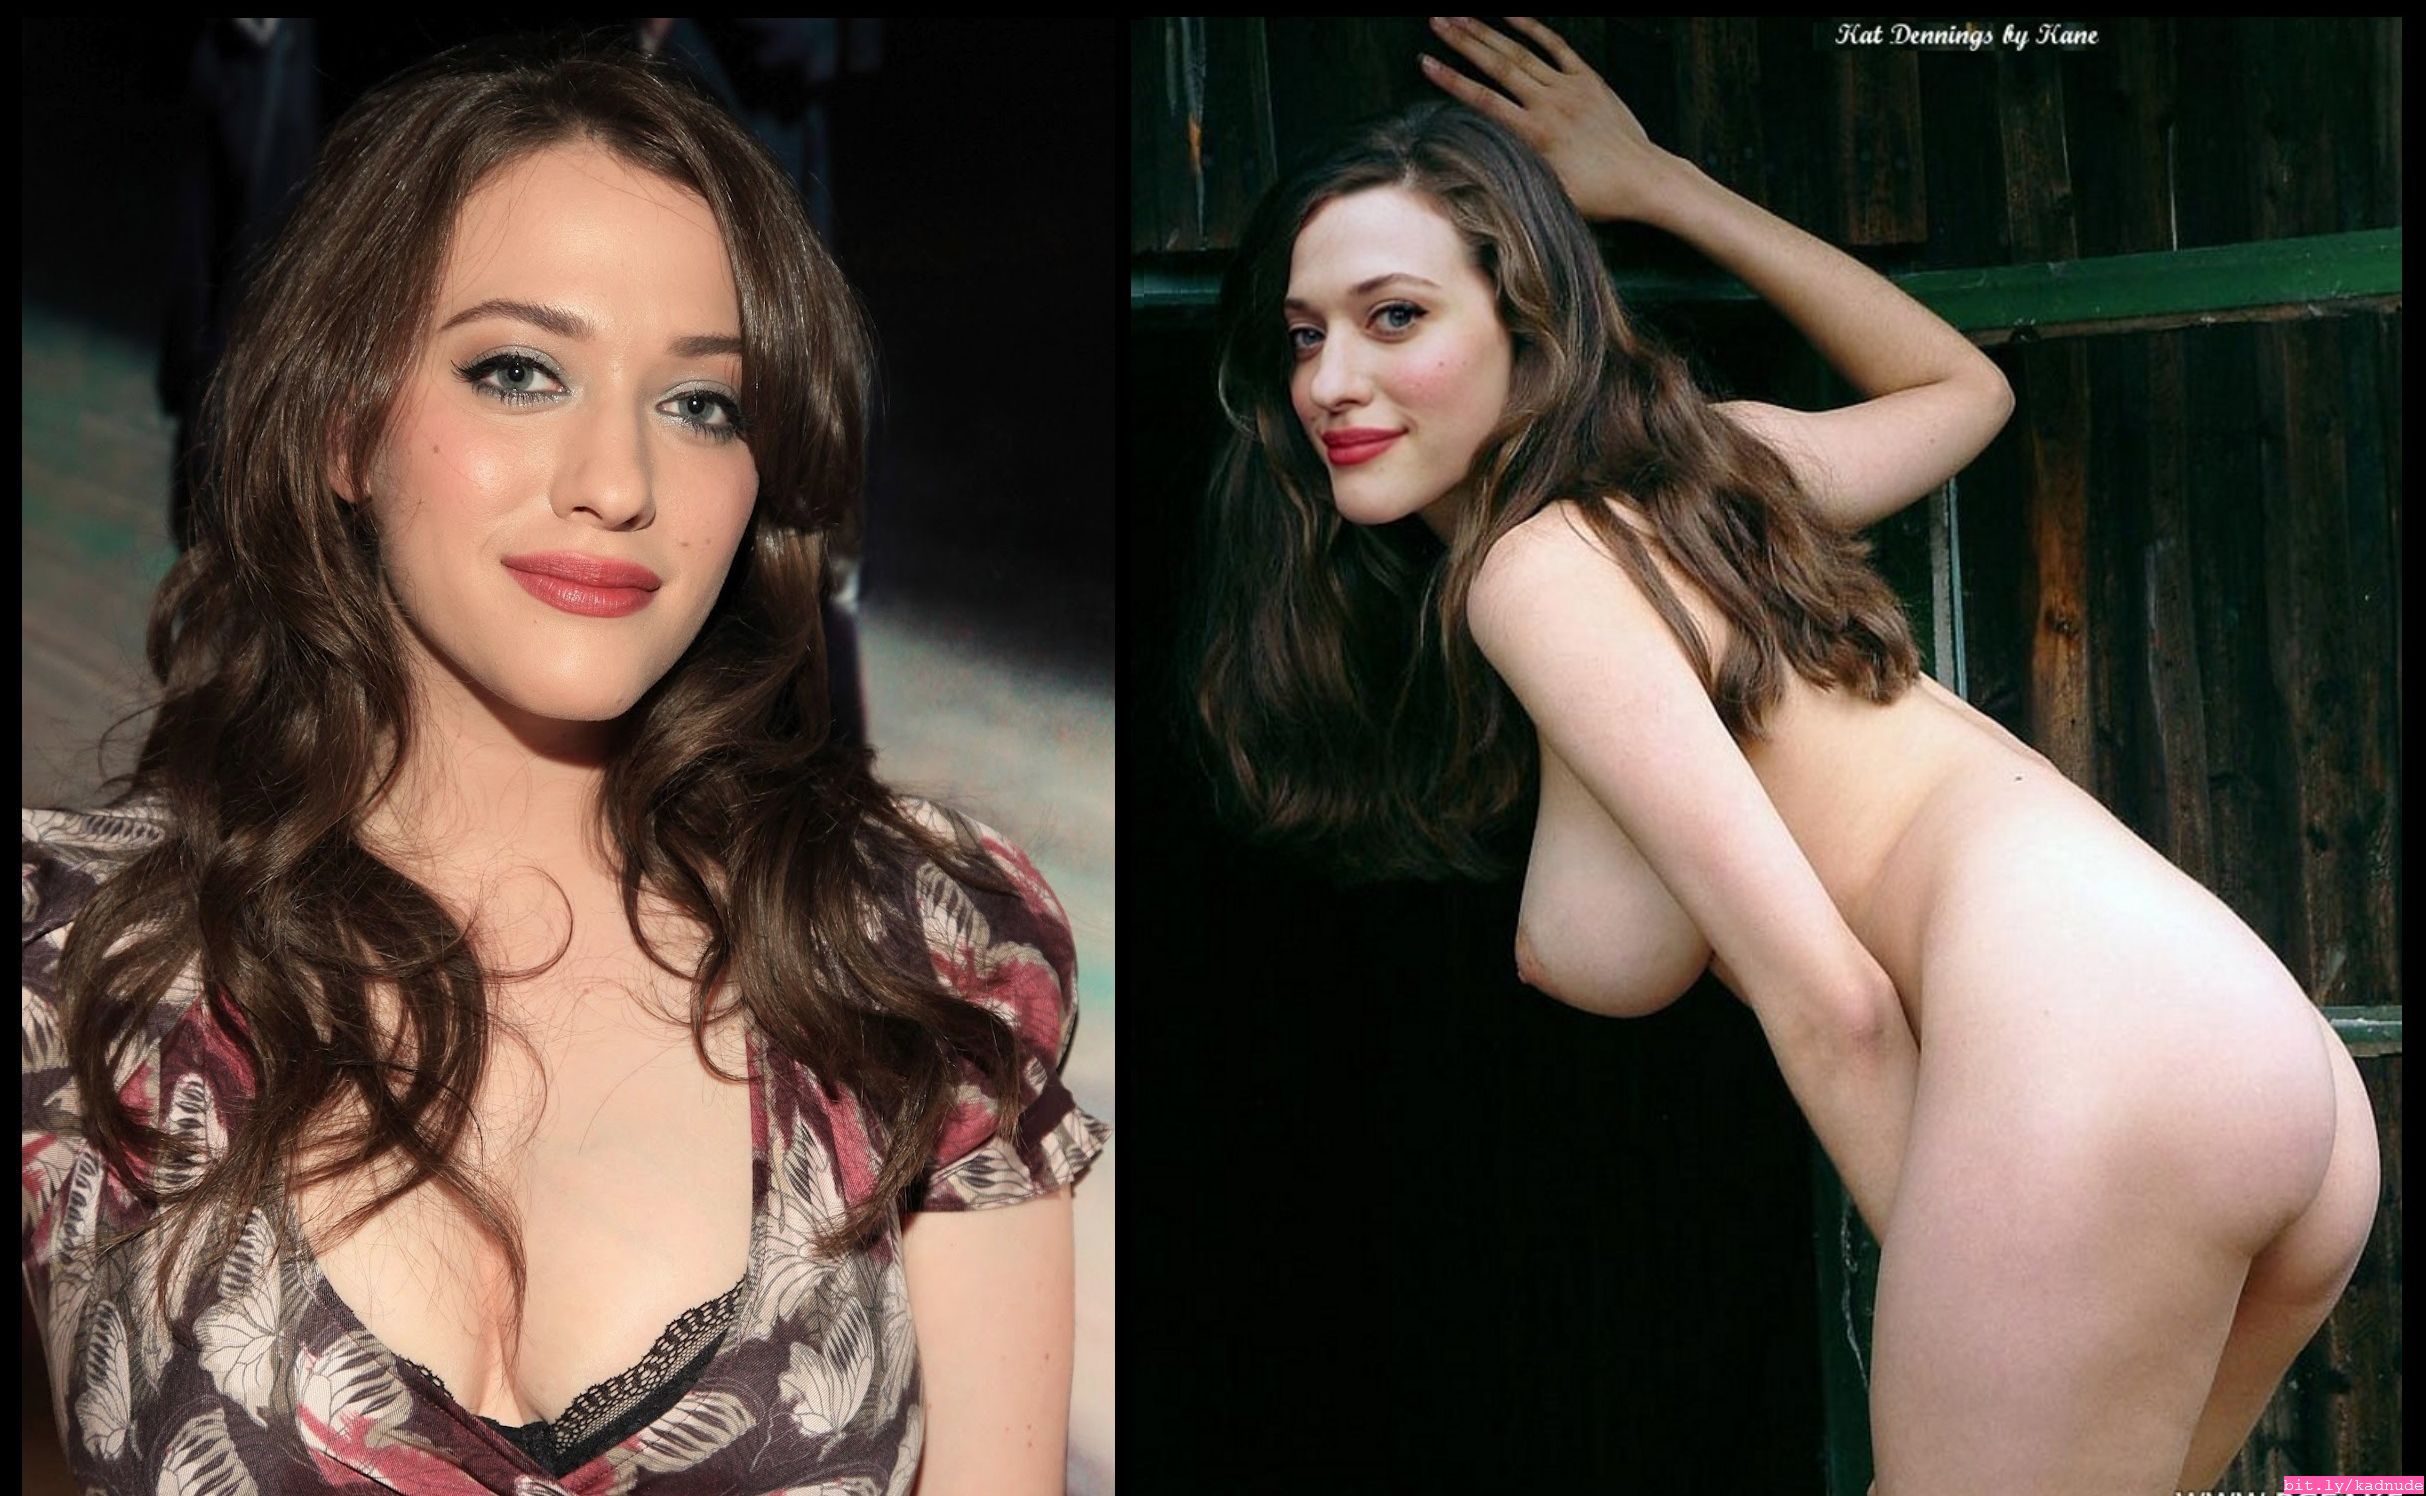 Kat dennings topless pictures